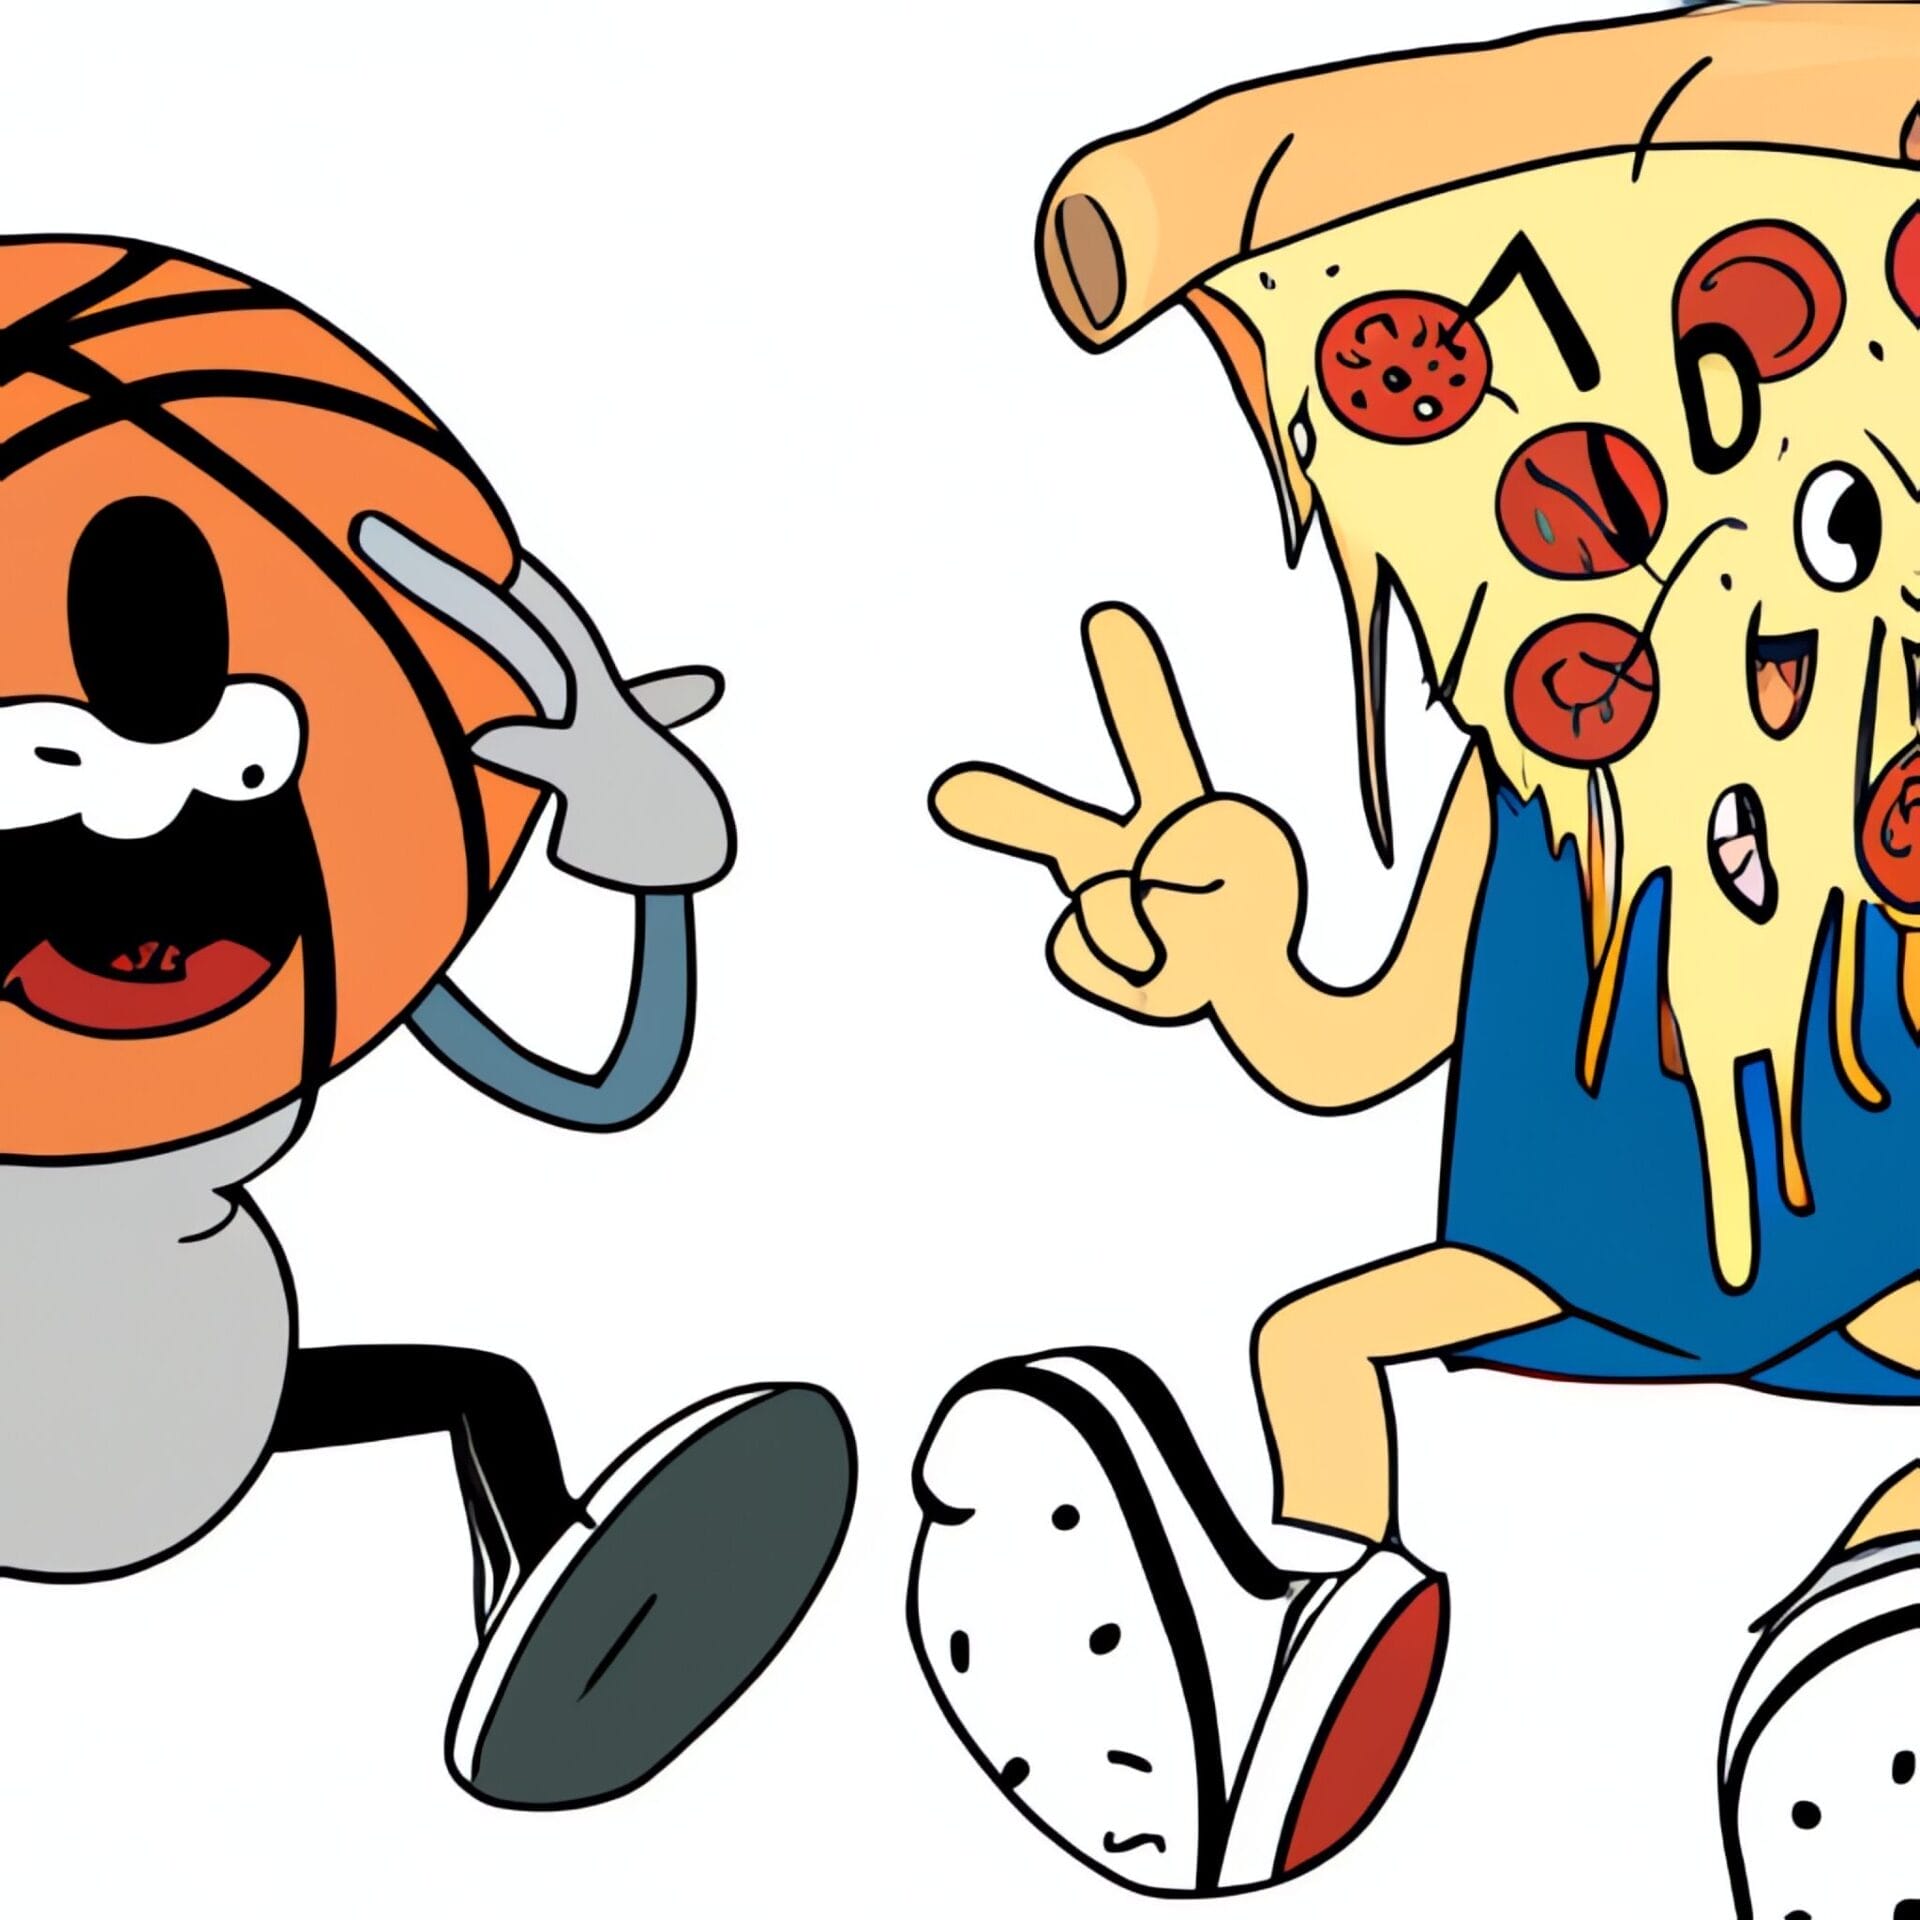 Anthropomorphic basketball and pizza slice characters, embodying types of sports fans, striking playful poses.